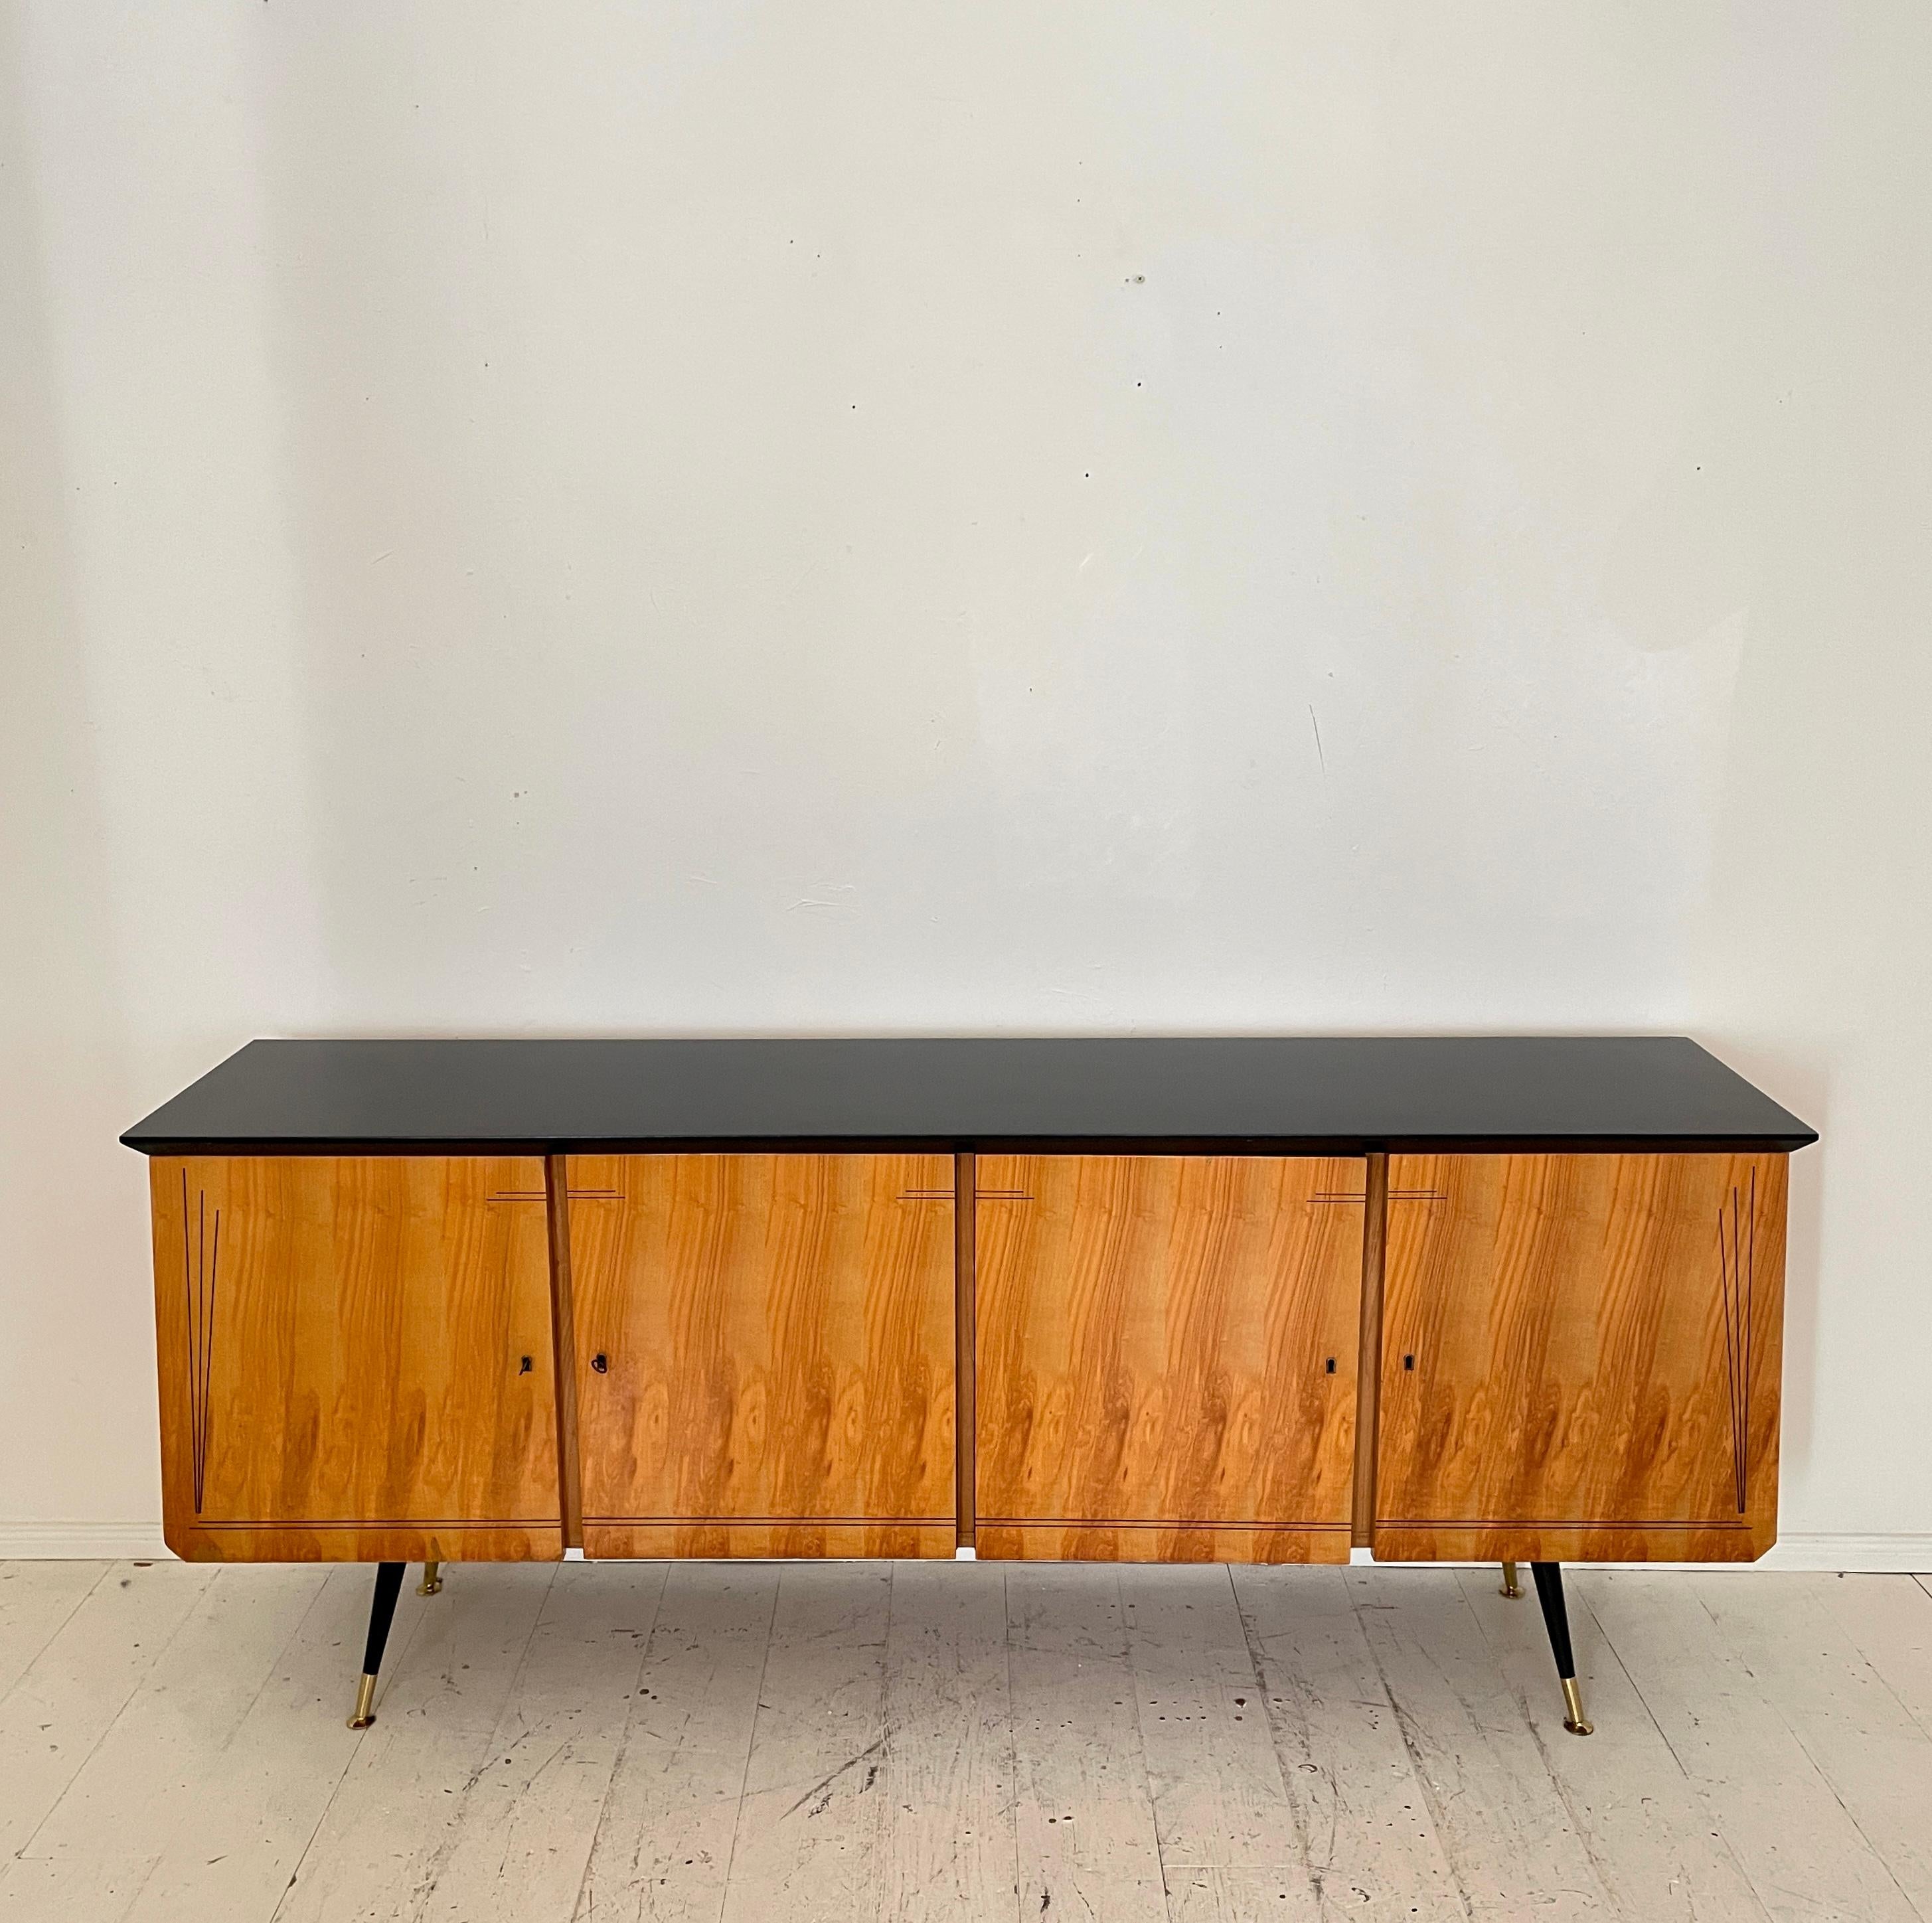 Mid-20th Century Italian Midcentury Sideboard with 4 Doors in Ash, Black and Brass, Around 1950 For Sale